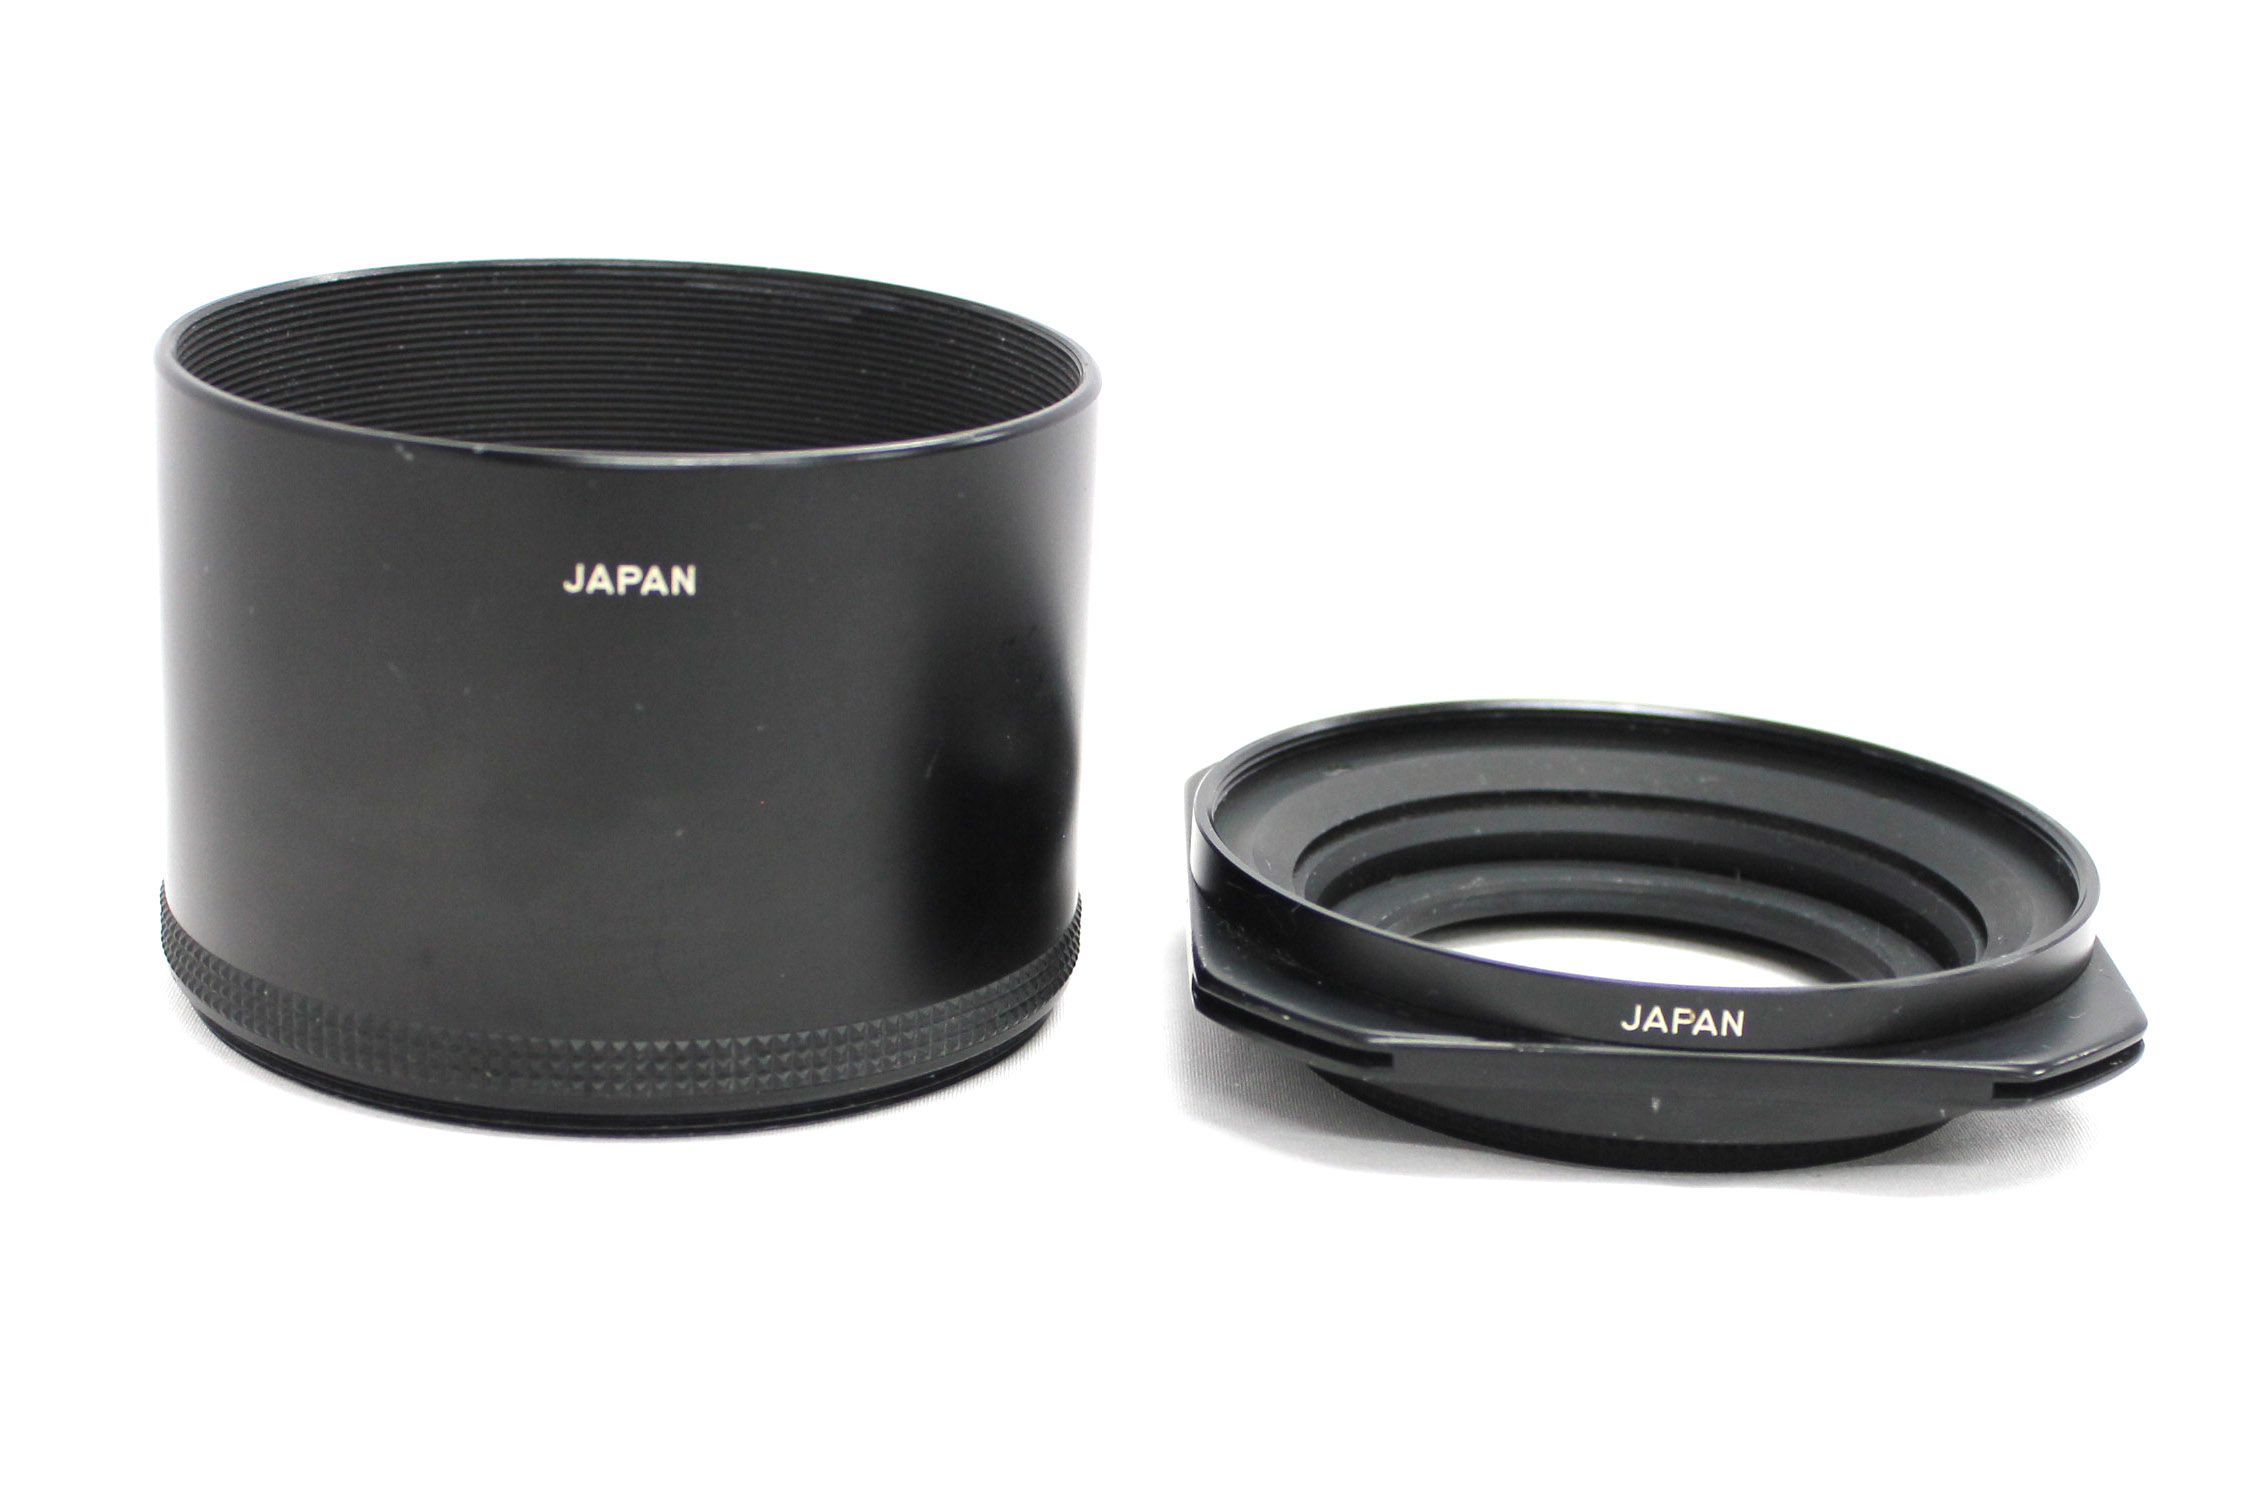  Contax Metal Hood 5 with Gelatine Filter Holder from Japan Photo 1